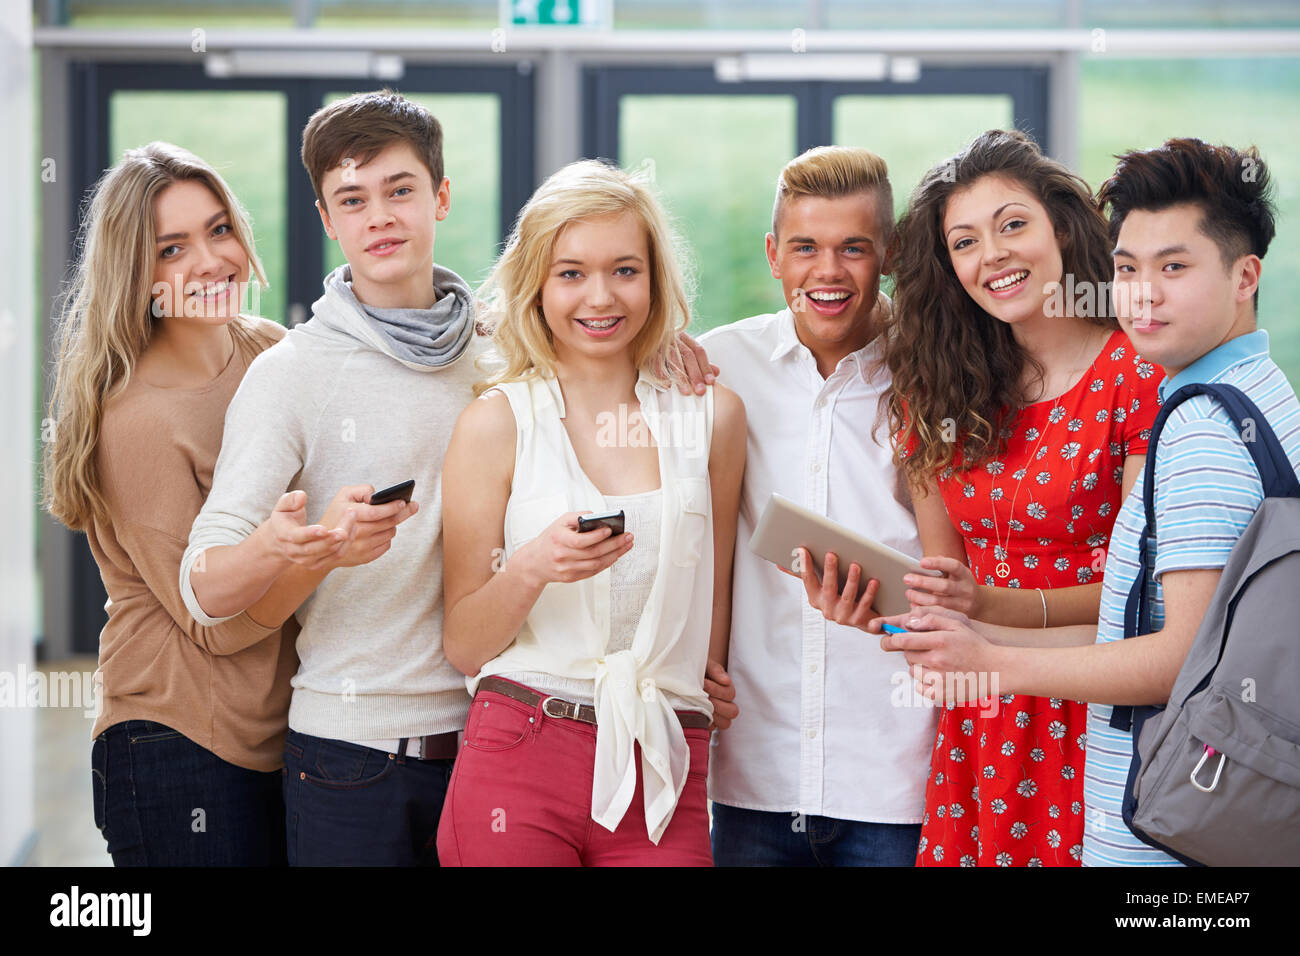 Portrait Of Students In Classroom Stock Photo